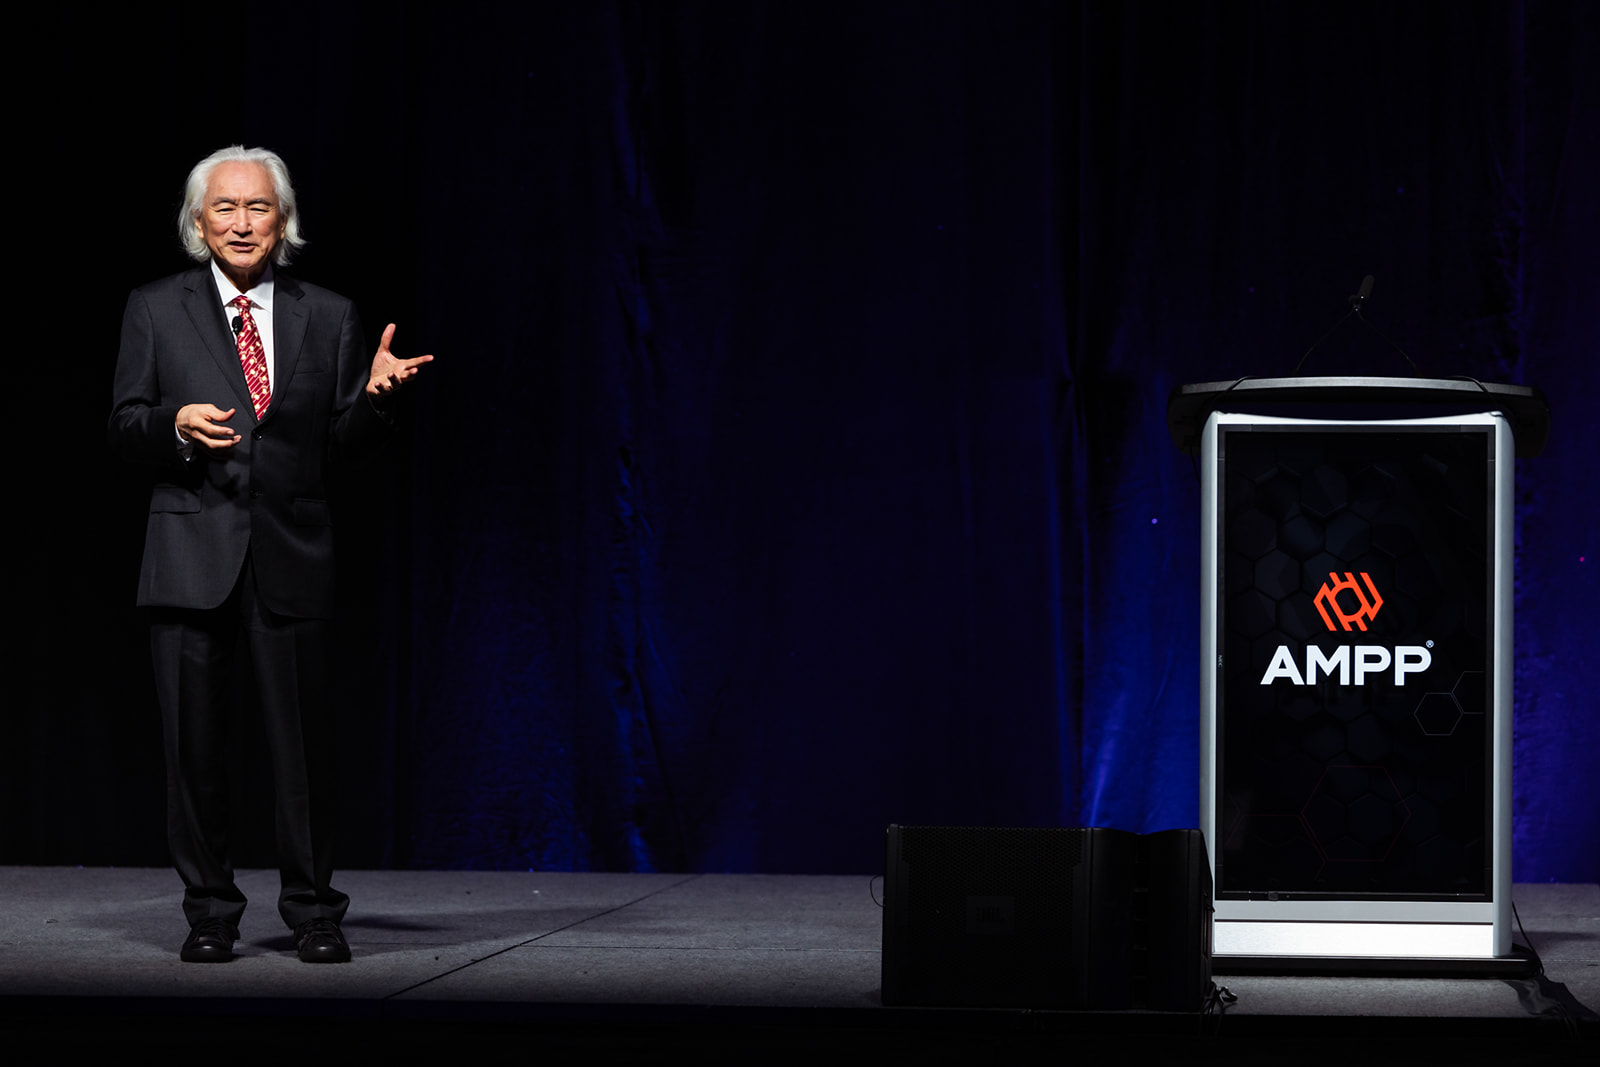 In his keynote address, Dr. Michio Kaku explained how artificial intelligence (AI) and nanotechnology could shape our industry’s future. Photo courtesy of AMPP.